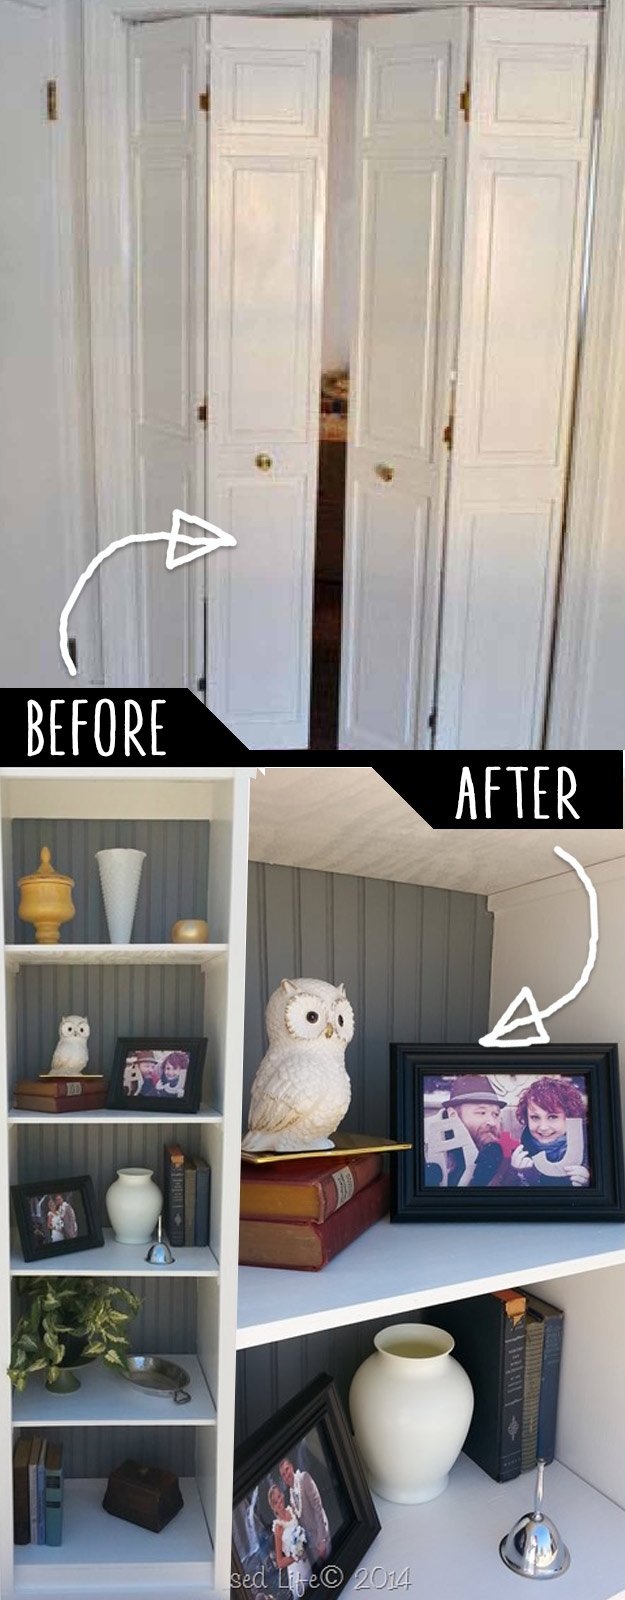 10 Amazing Do It Yourself Furniture Ideas 39 clever diy furniture hacks outdoorbeing 2022